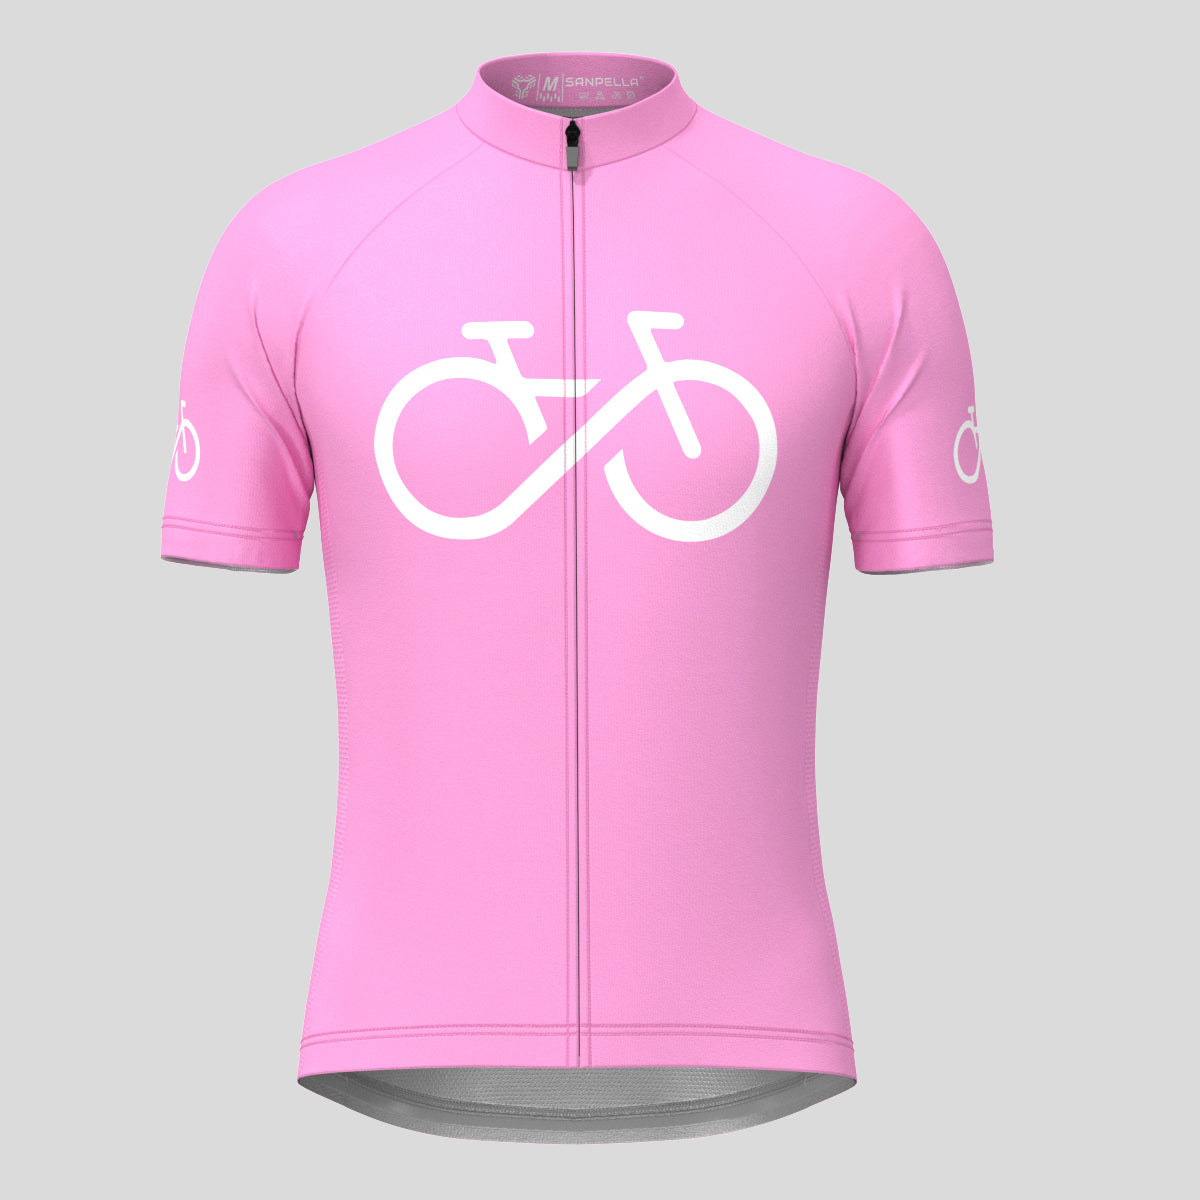 Bike Forever Men's Cycling Jersey - Neo Pink